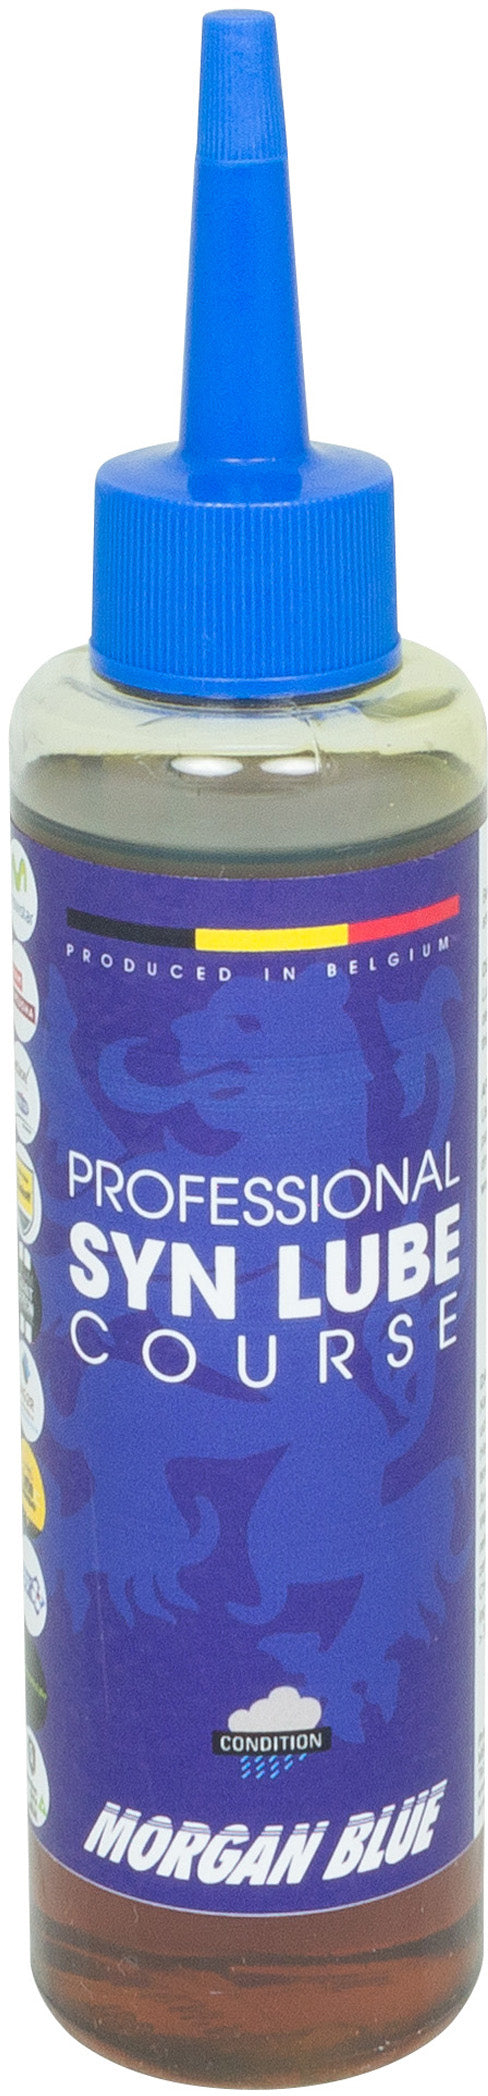 Morgan Blue Syn Lube Course Synthetic Chain Oil 125ml